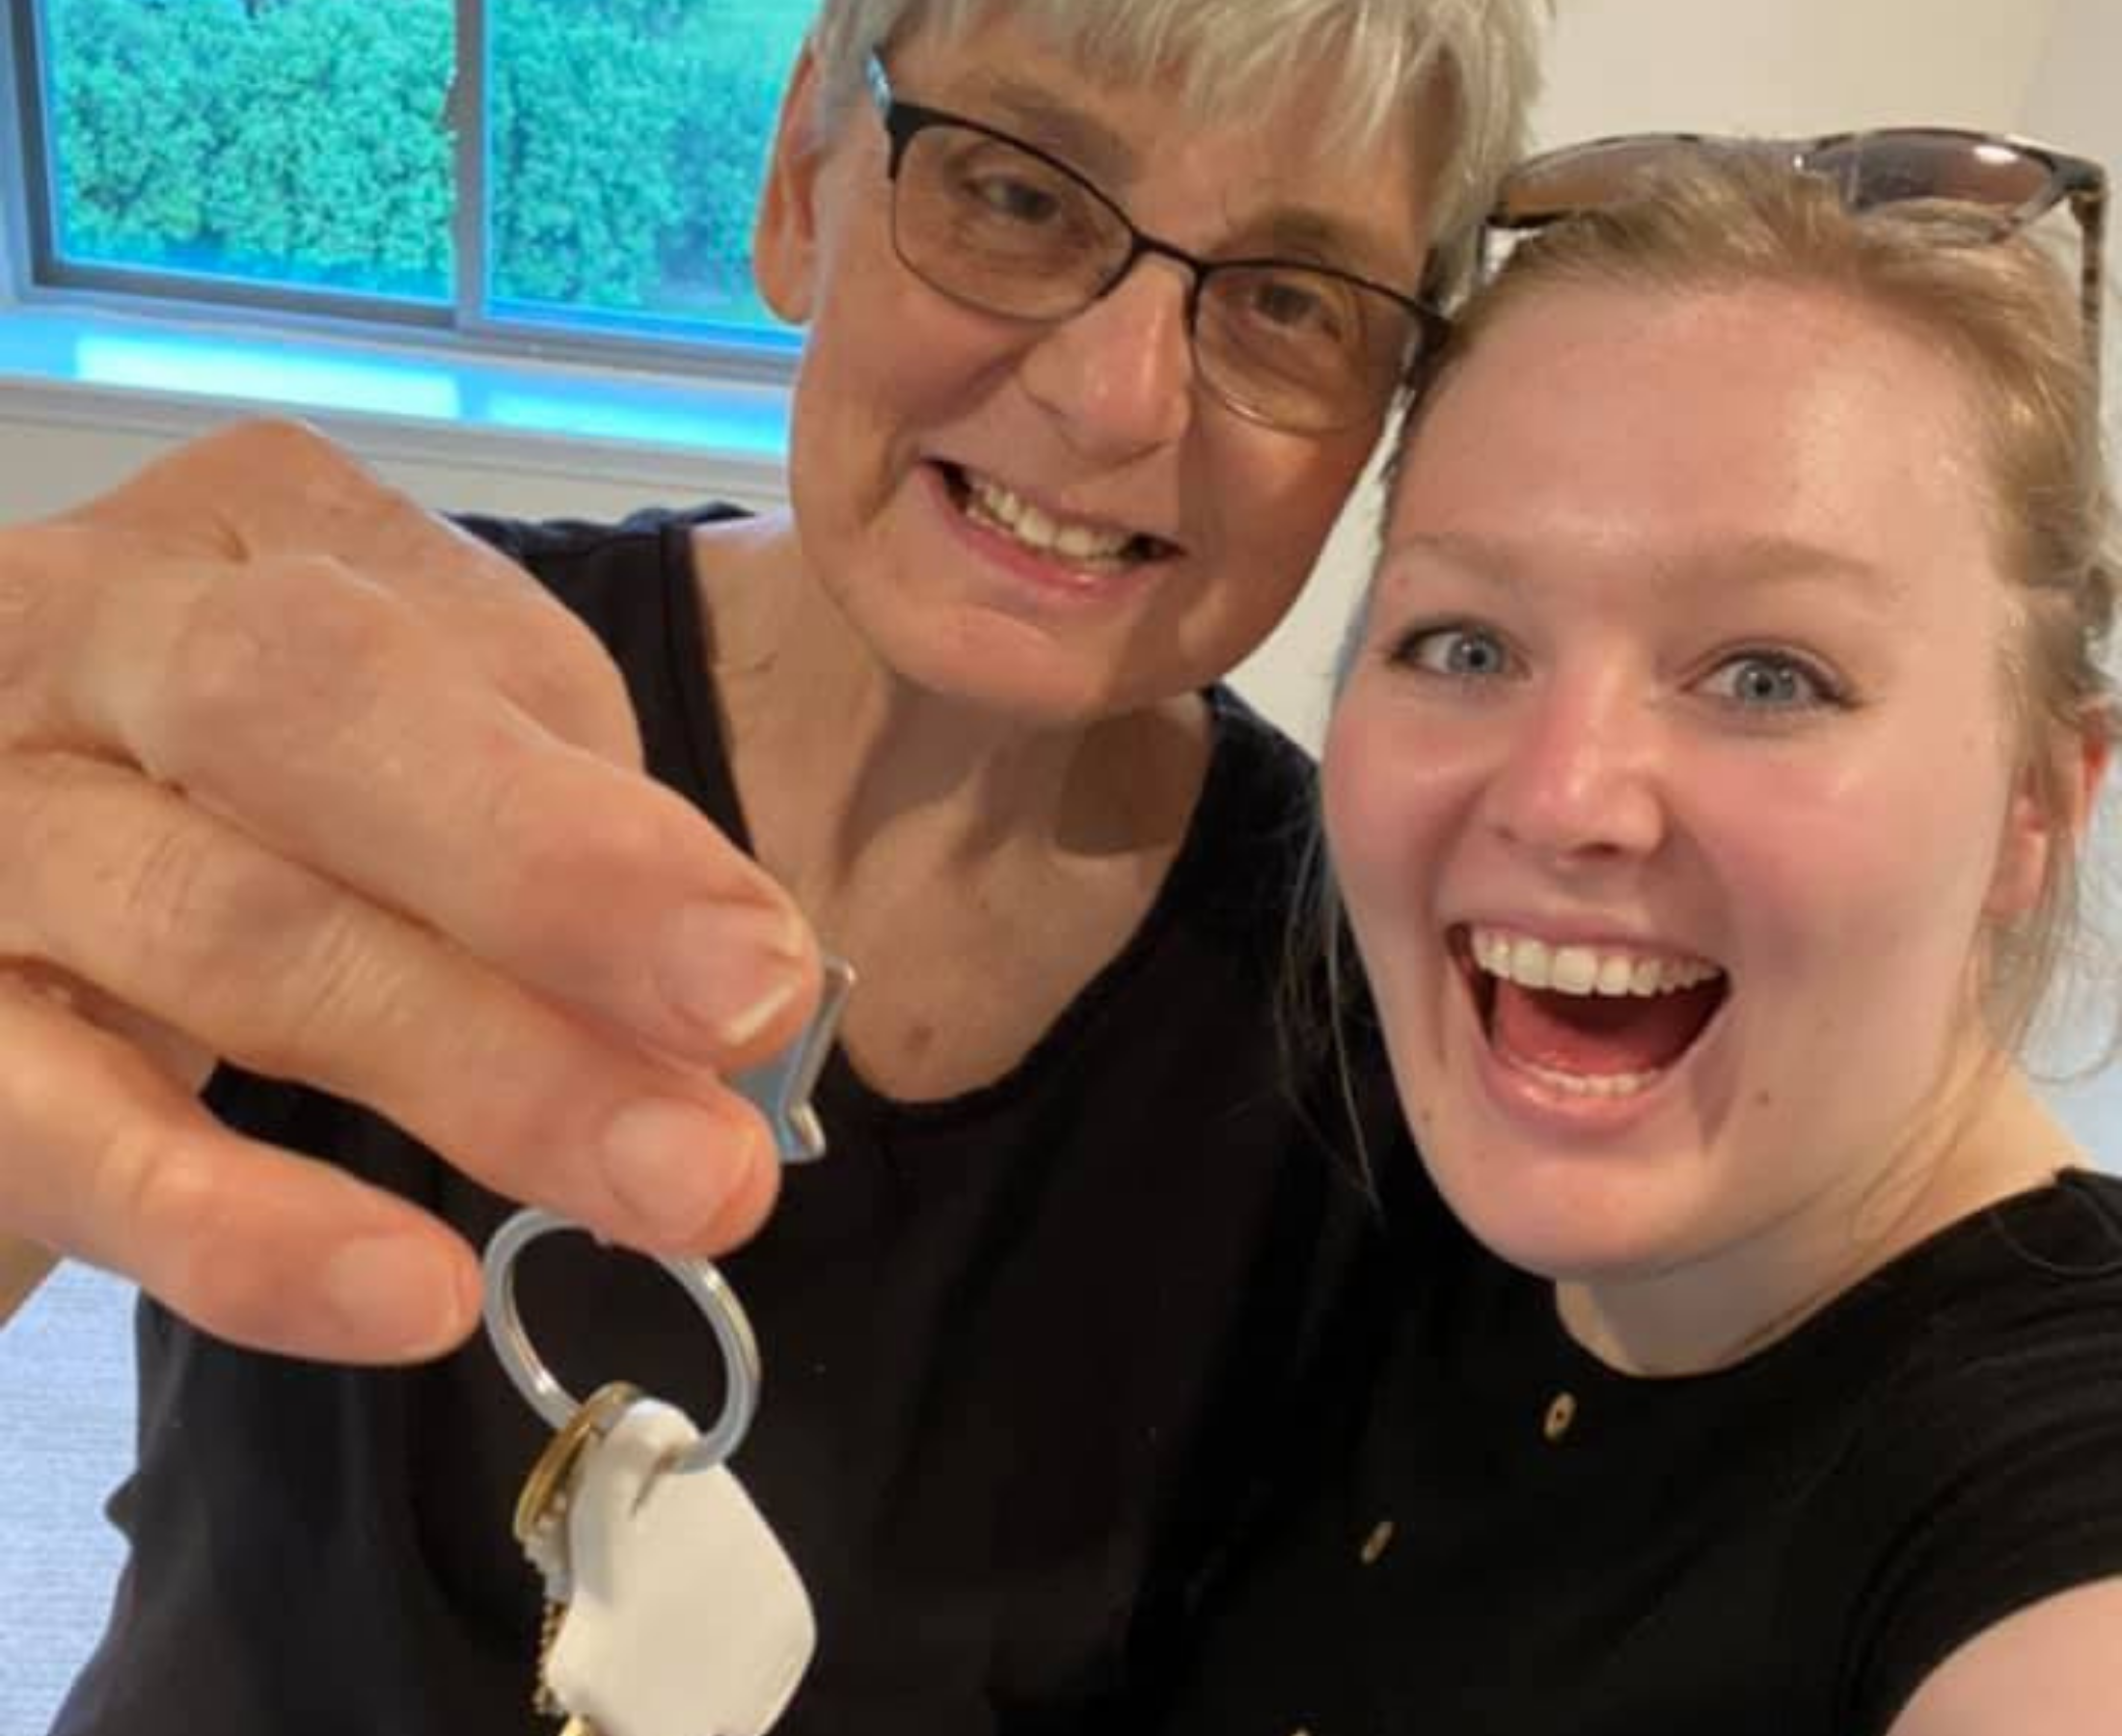 resident and employee smiling with key